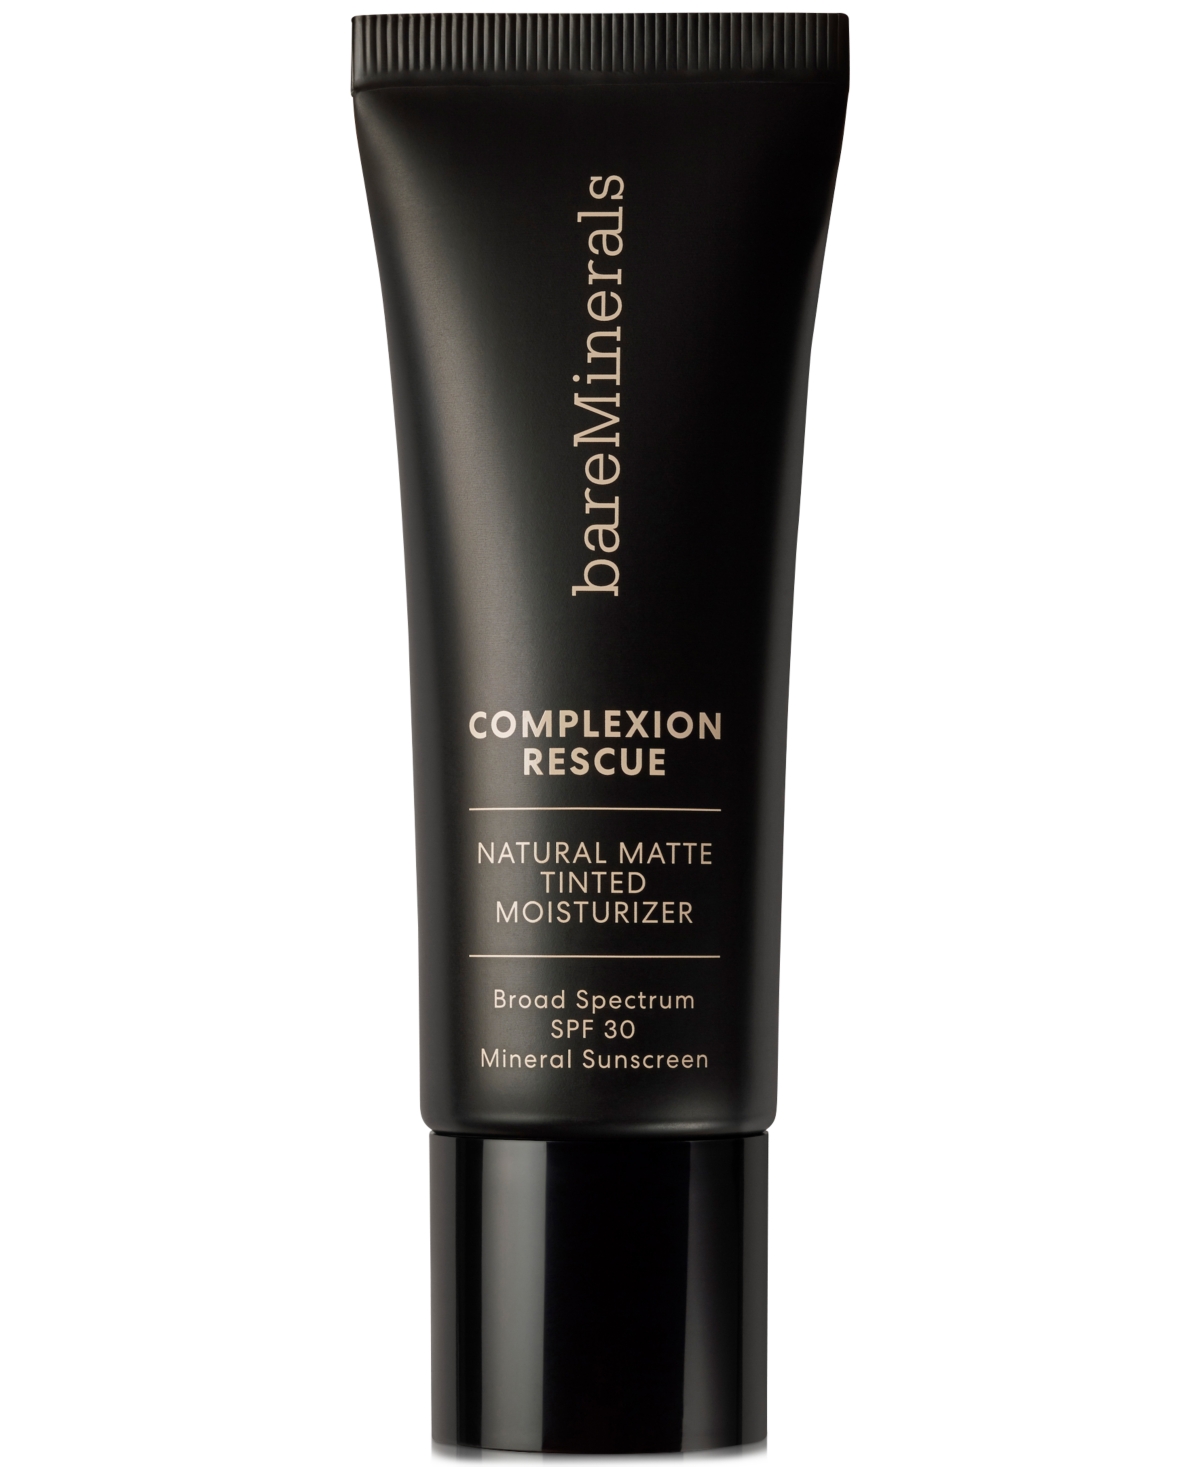 Bareminerals Complexion Rescue Natural Matte Tinted Moisturizer Spf 30 In Natural Pecan